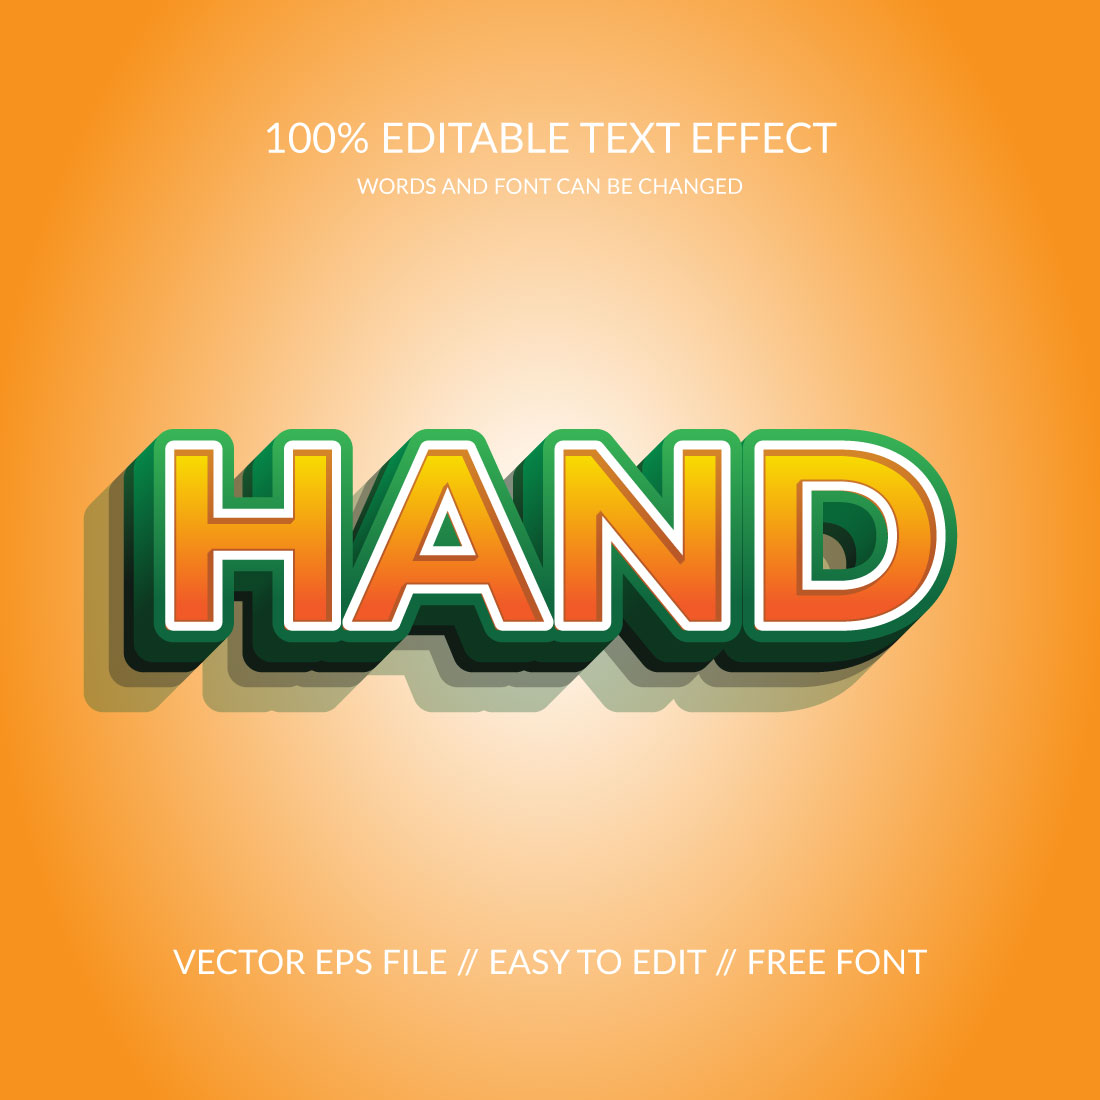 Hand text effect preview image.